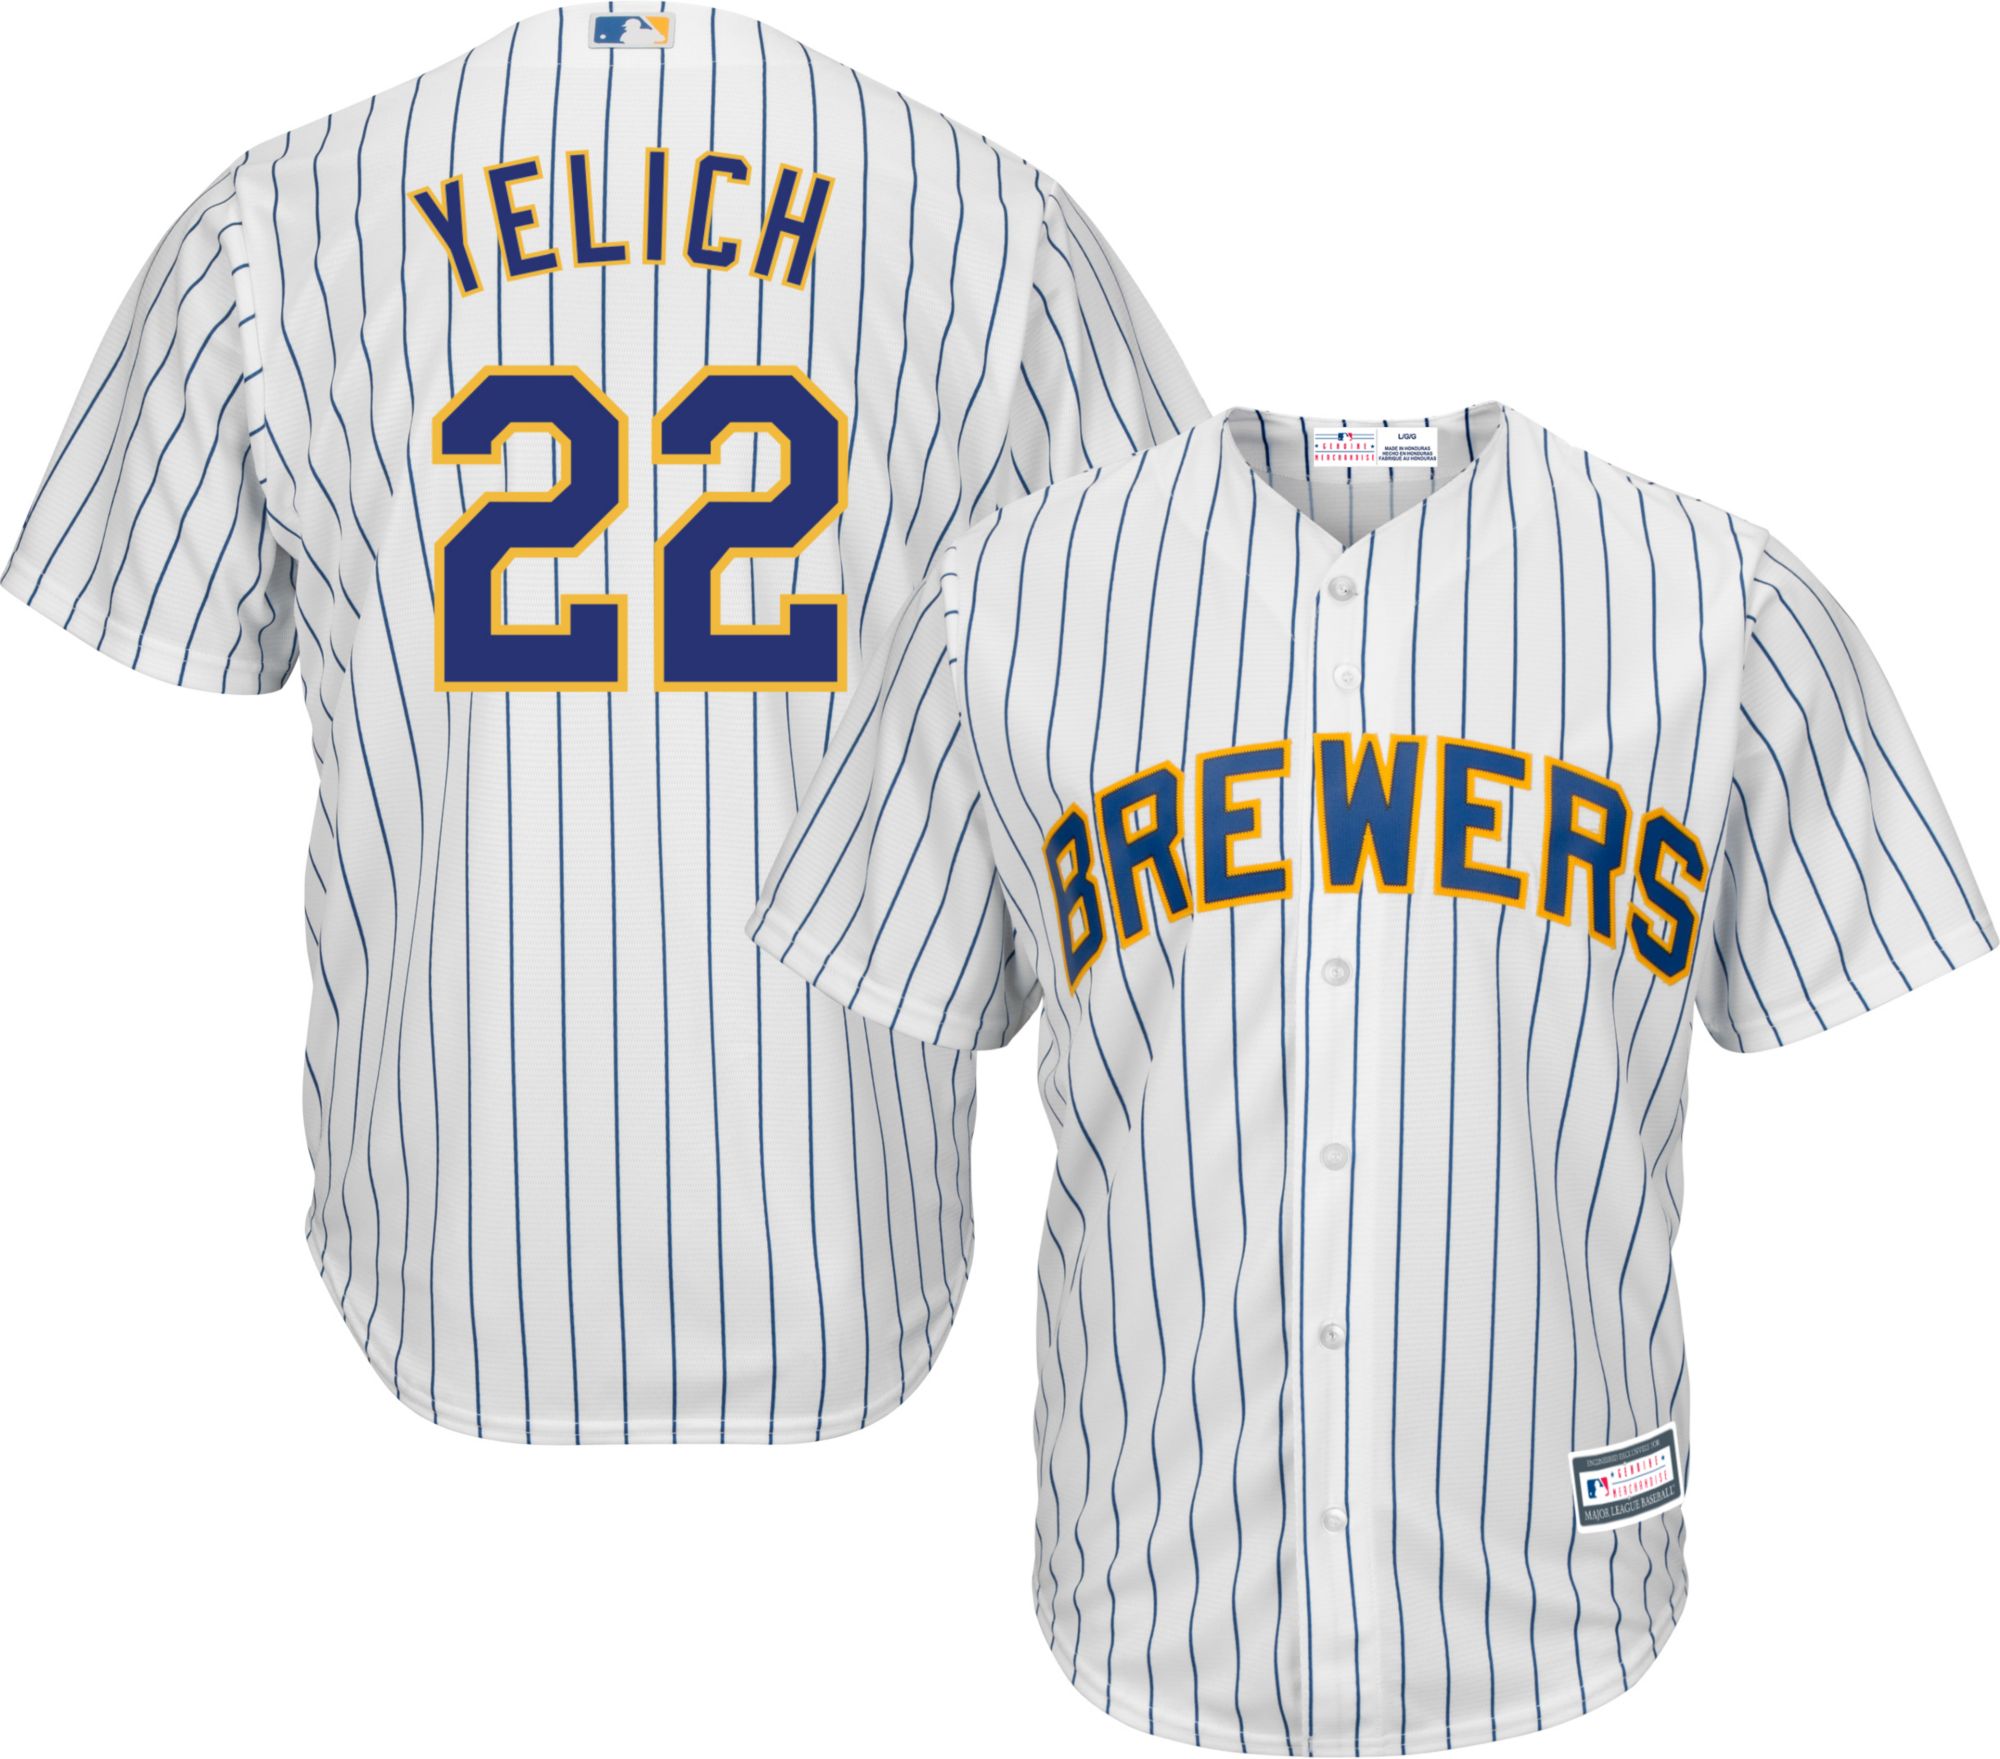 youth yelich jersey